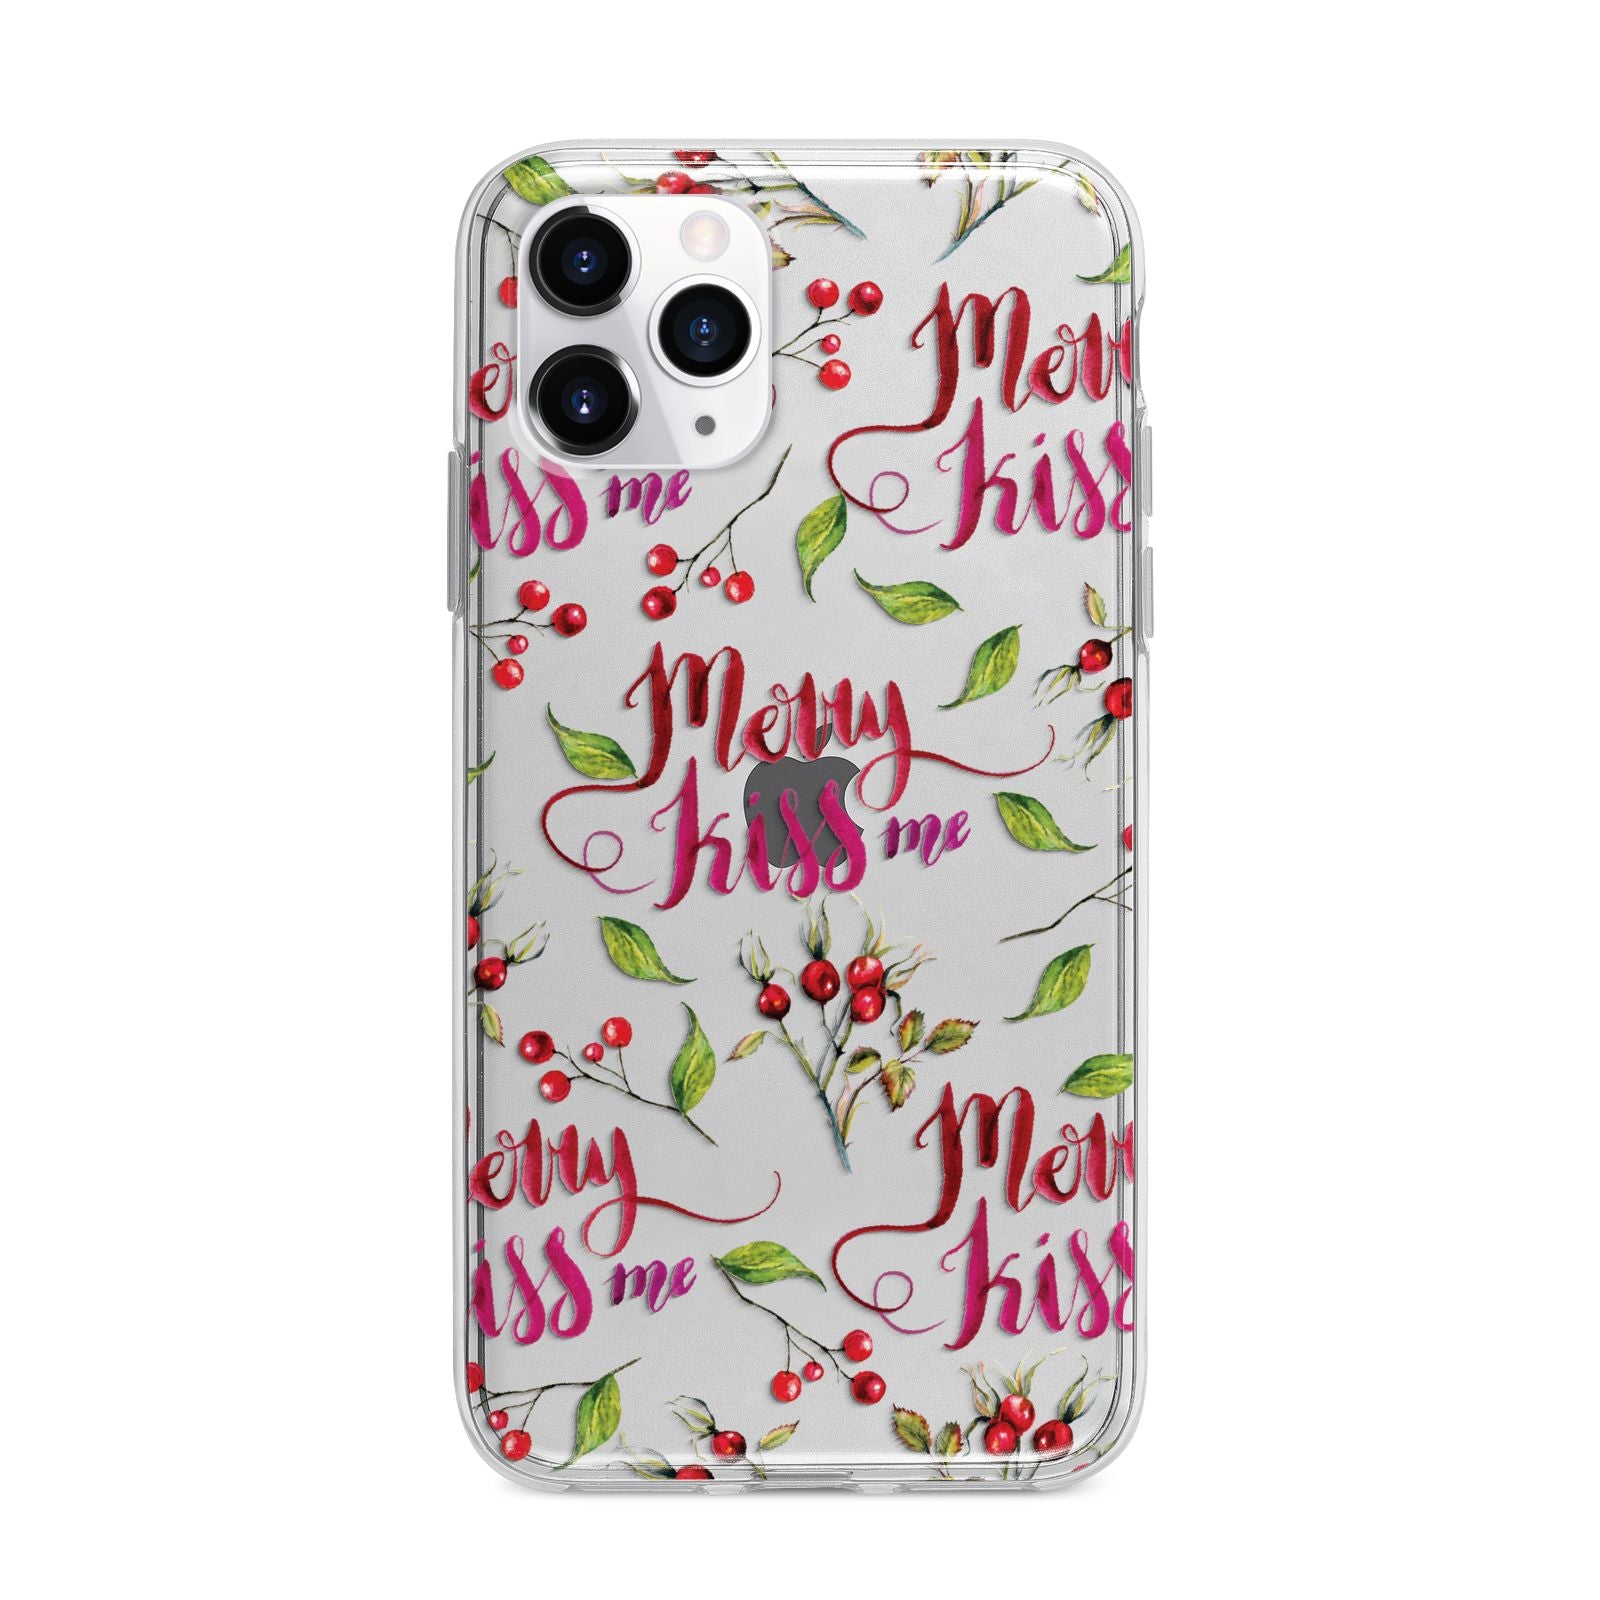 Merry kiss me Apple iPhone 11 Pro in Silver with Bumper Case